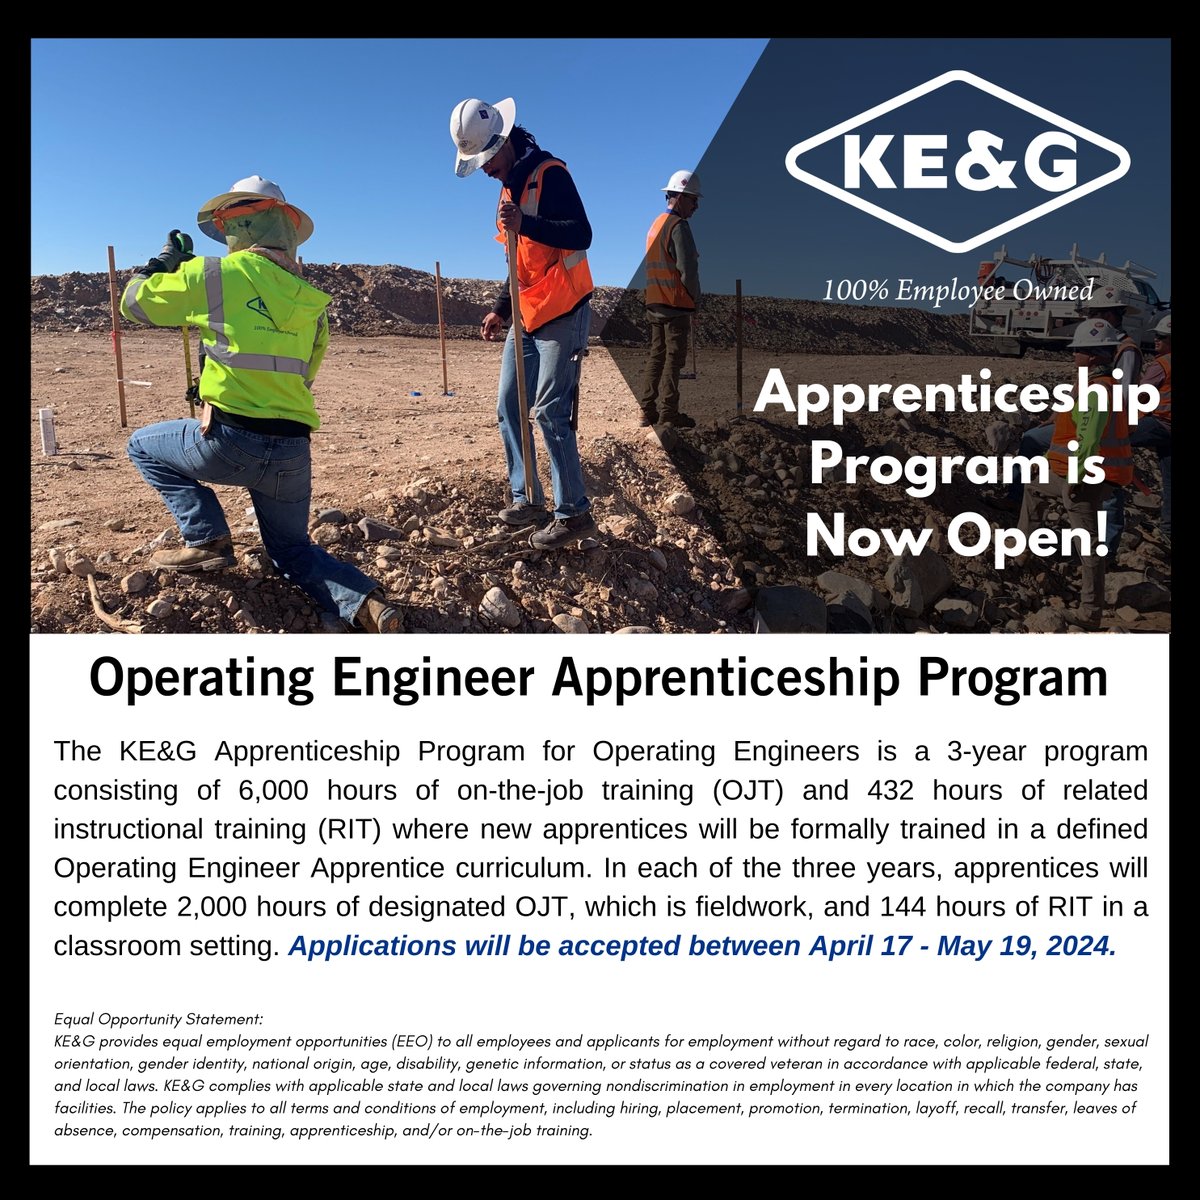 Join KE&G as an employee-owner by applying for our apprenticeship program. Applications are now open! 

kegtus.com/about-us/appre…

#apprenticeshipprogram #esop #wesop #employeeownership #kegconstruction #construction #heavycivilconstruction #ConstructingOurLegacy